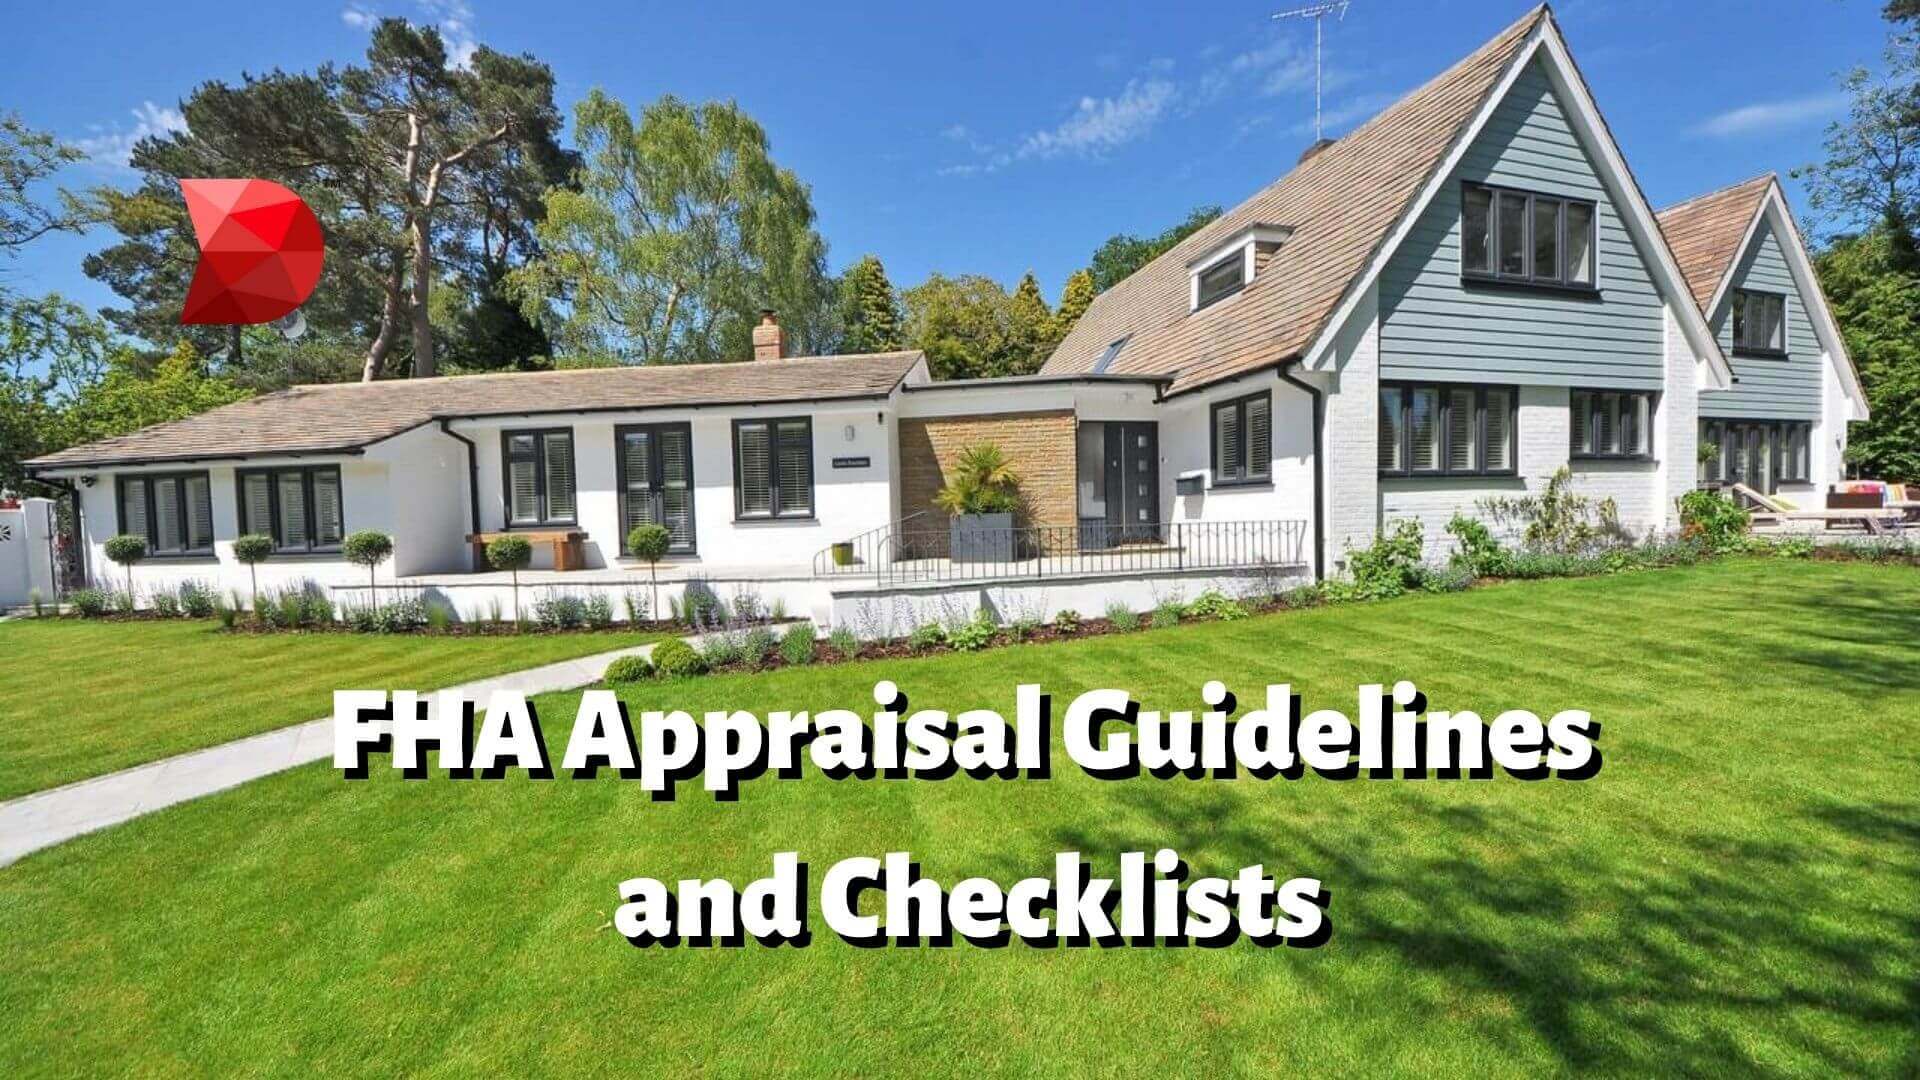 FHA Appraisal Guidelines and Checklists